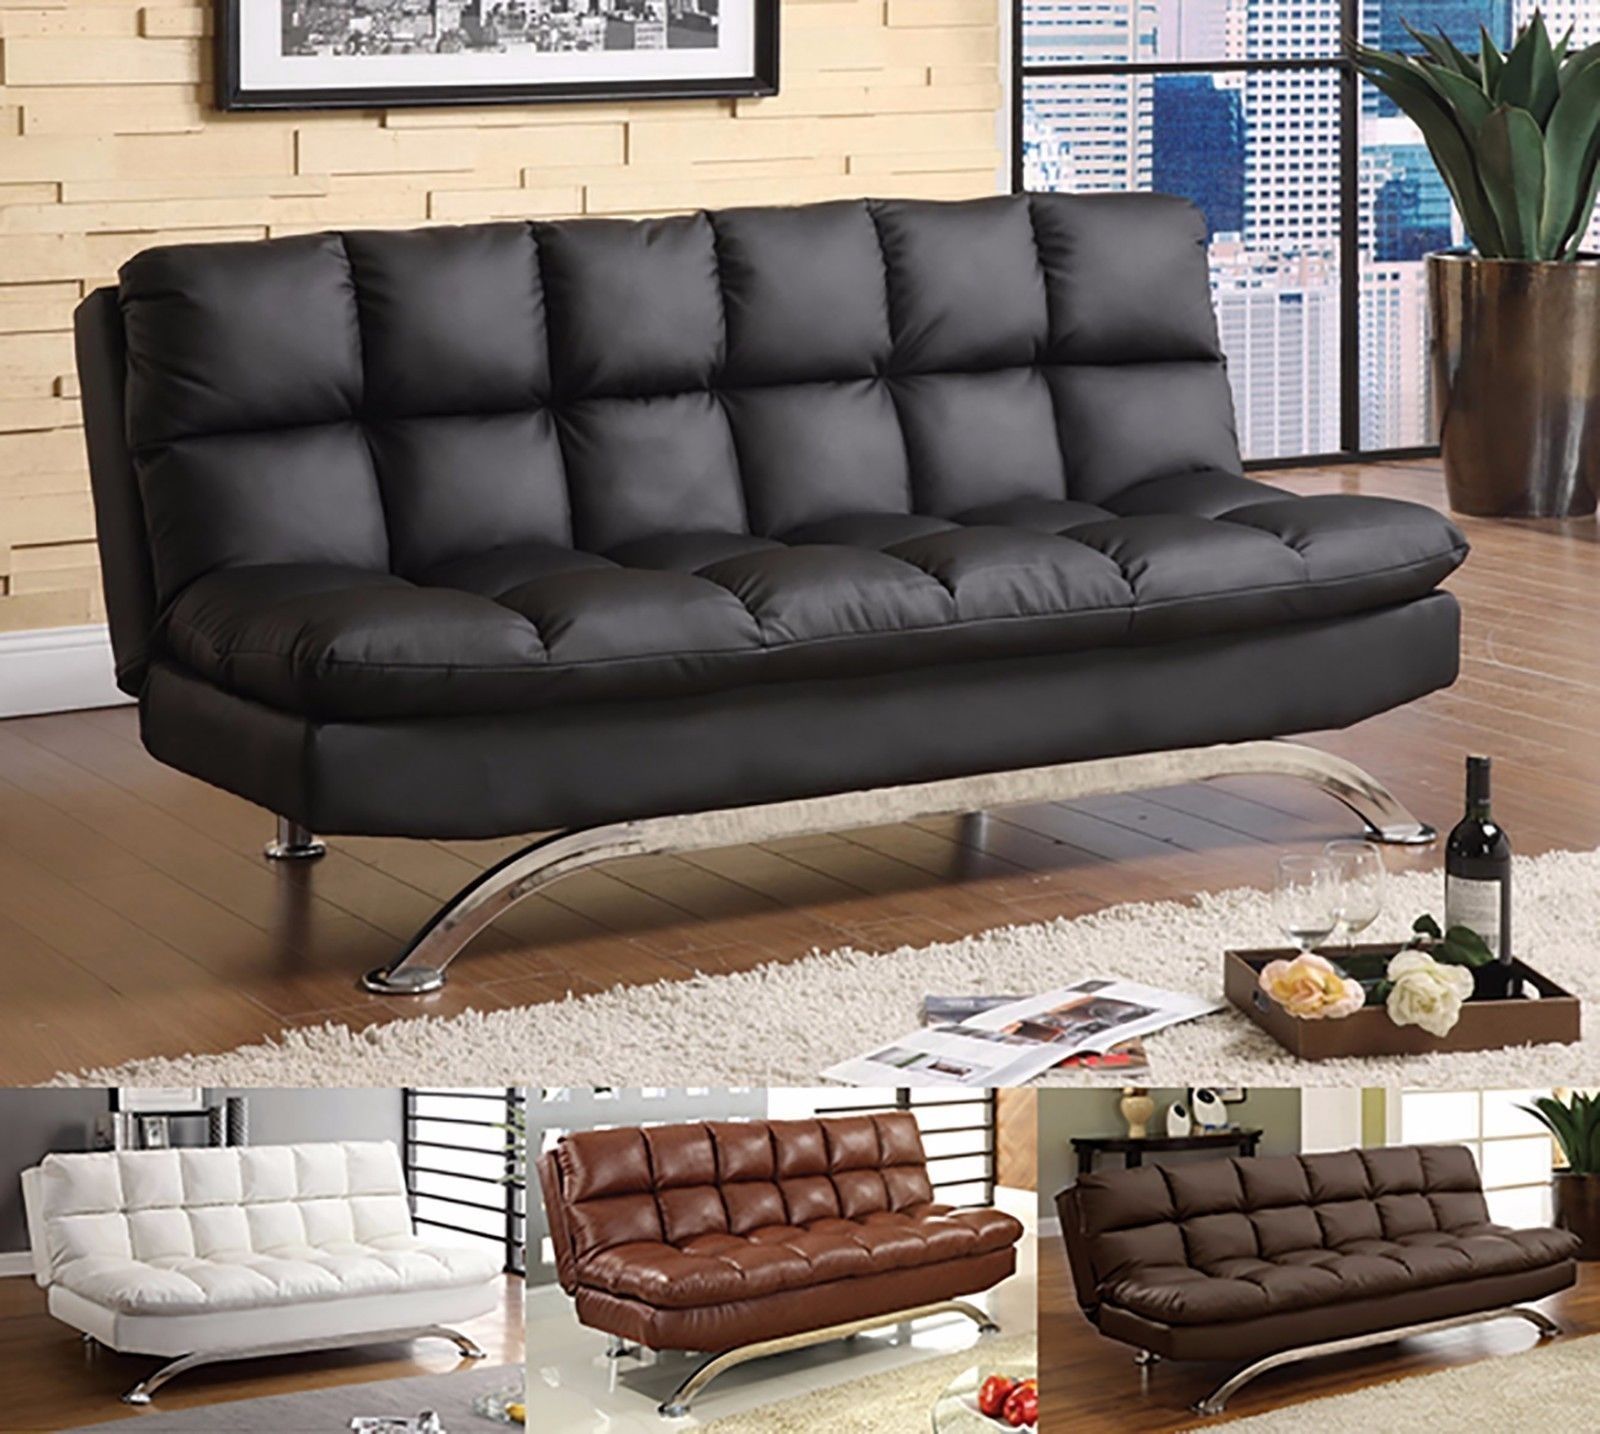 Furniture : Mattress Firm University Fold Out Couch Sleeper Pertaining To Tuscaloosa Sectional Sofas (Photo 6 of 10)